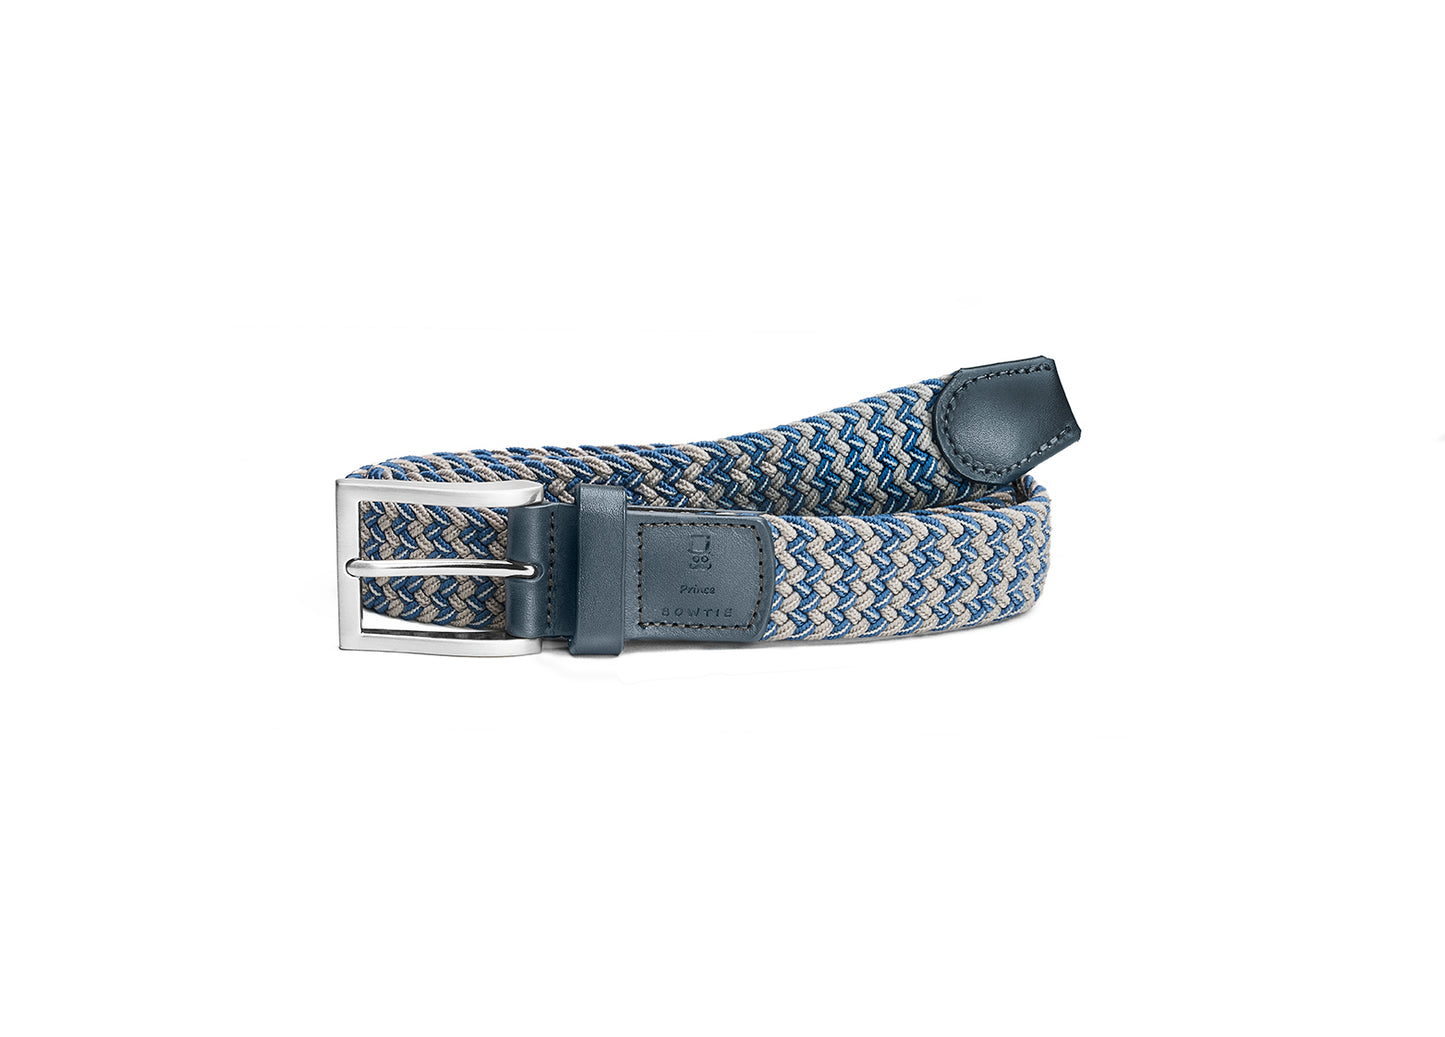 Belts in coordinated color heights to match any pair of jeans or cino